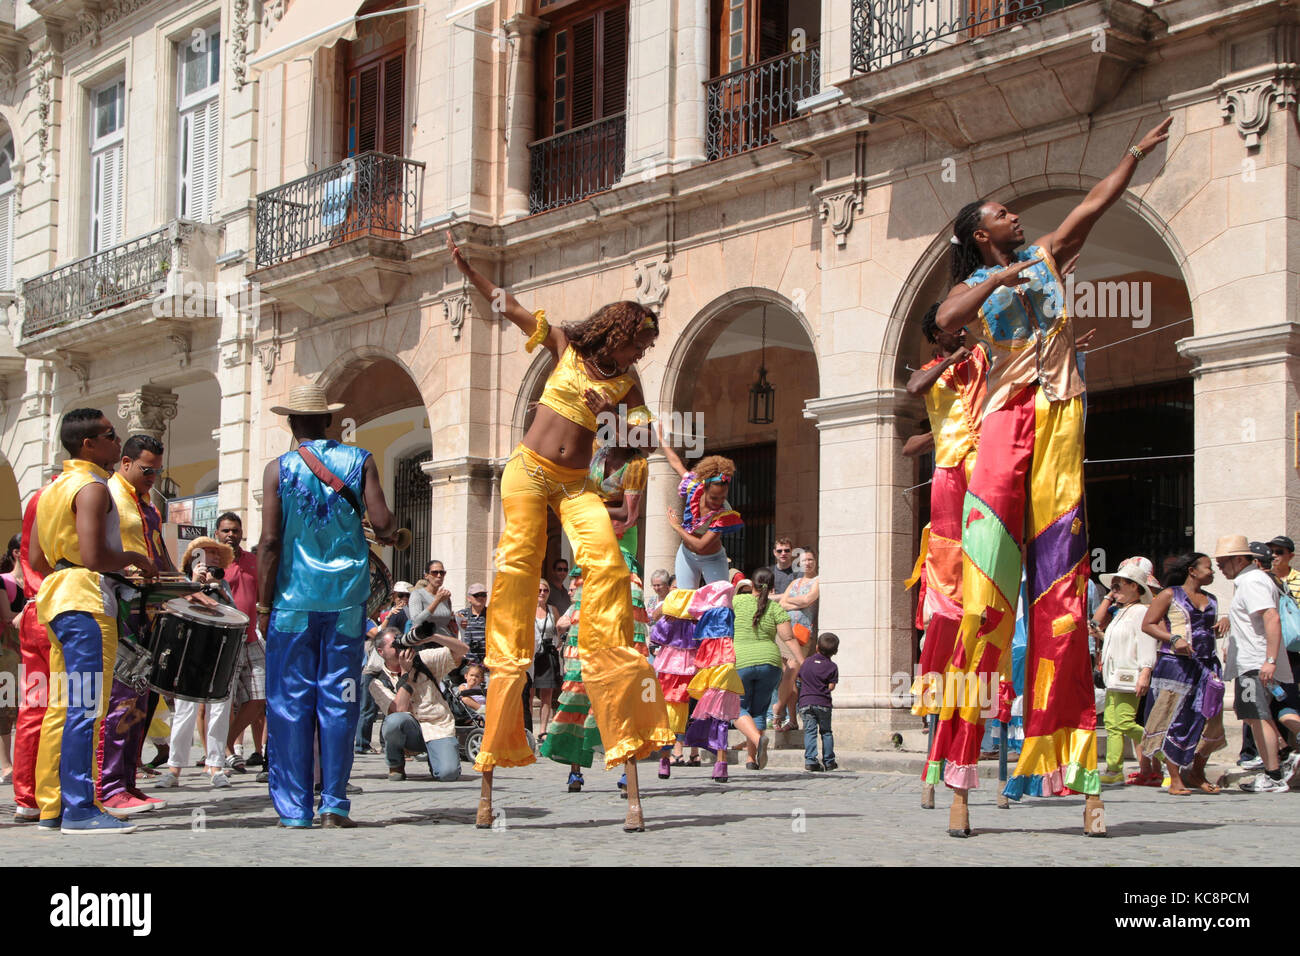 HAVANA, CUBA, FEBRUARY 16, 2014 : Stilt dancers in the streets of Havana. Havana is the largest city in the Caribbean and its center is inscribed on U Stock Photo